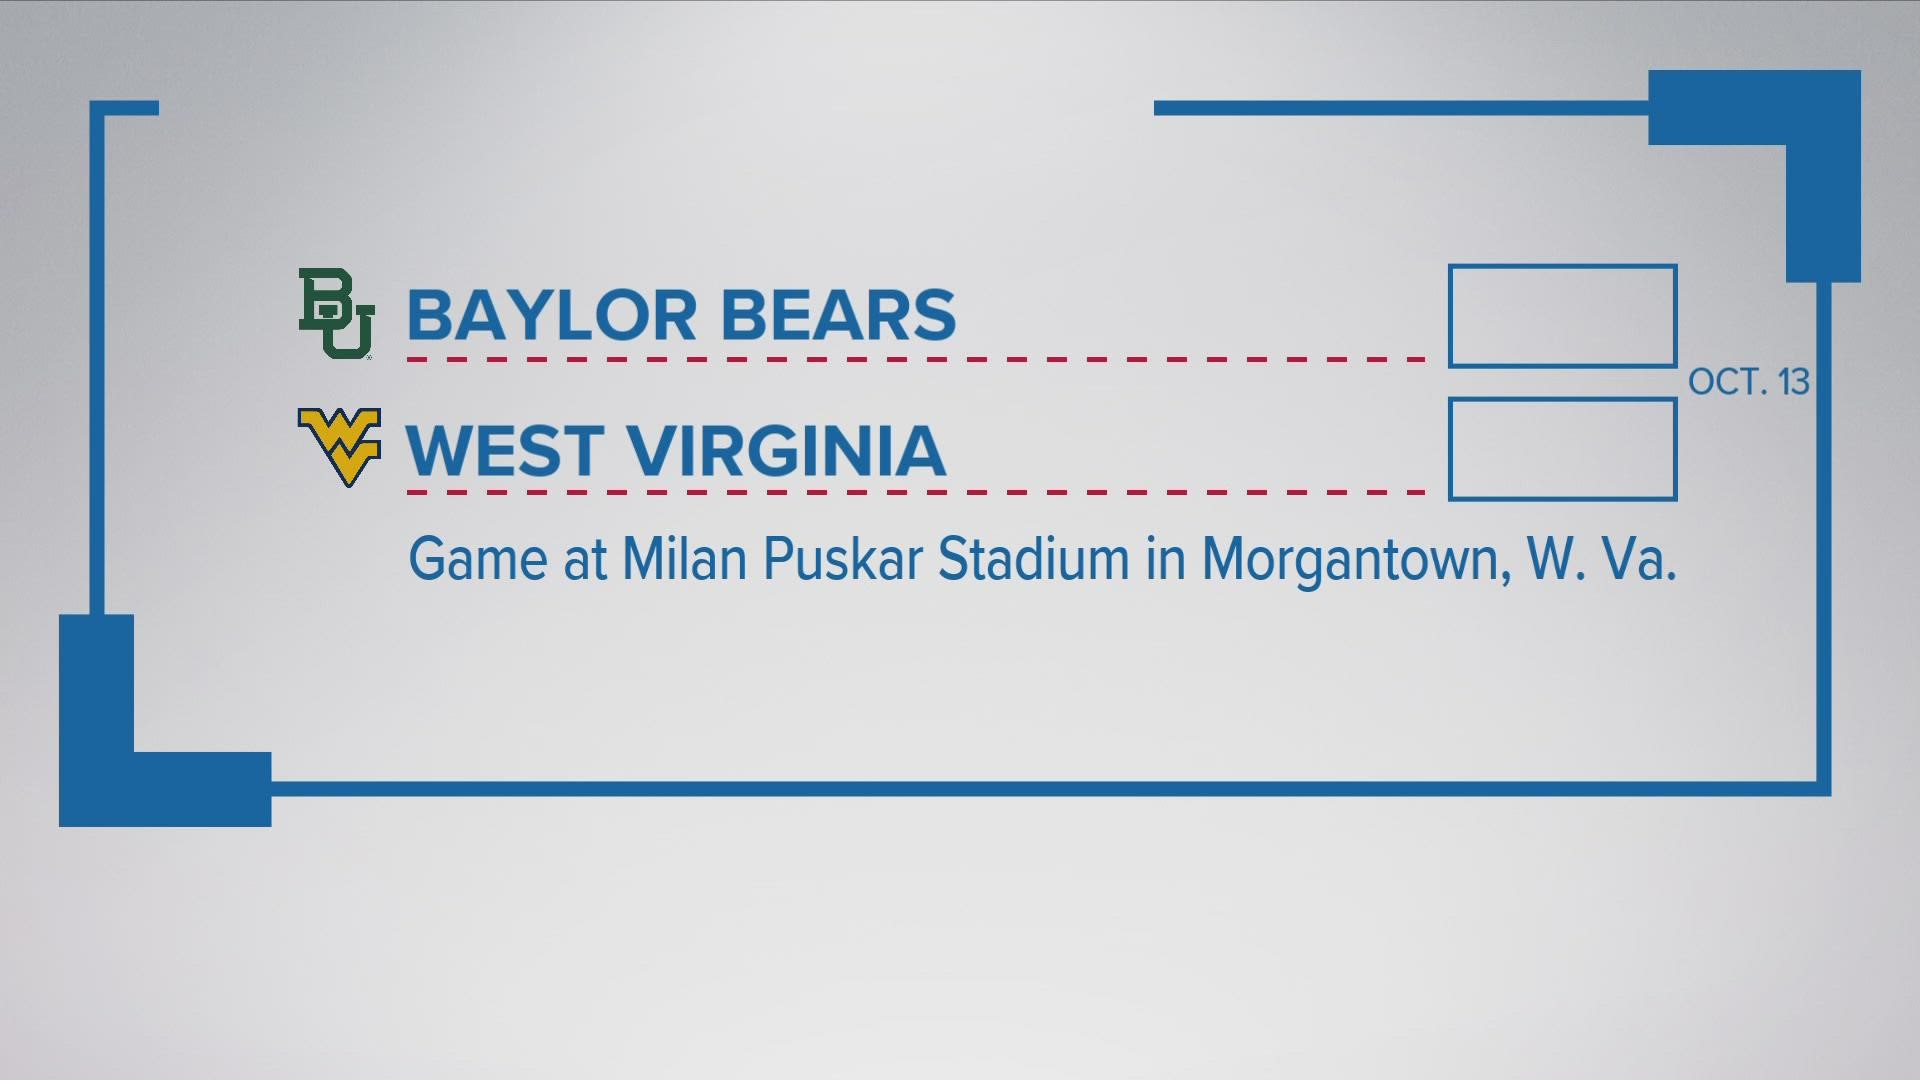 Baylor will head to West Virginia for next week's game.